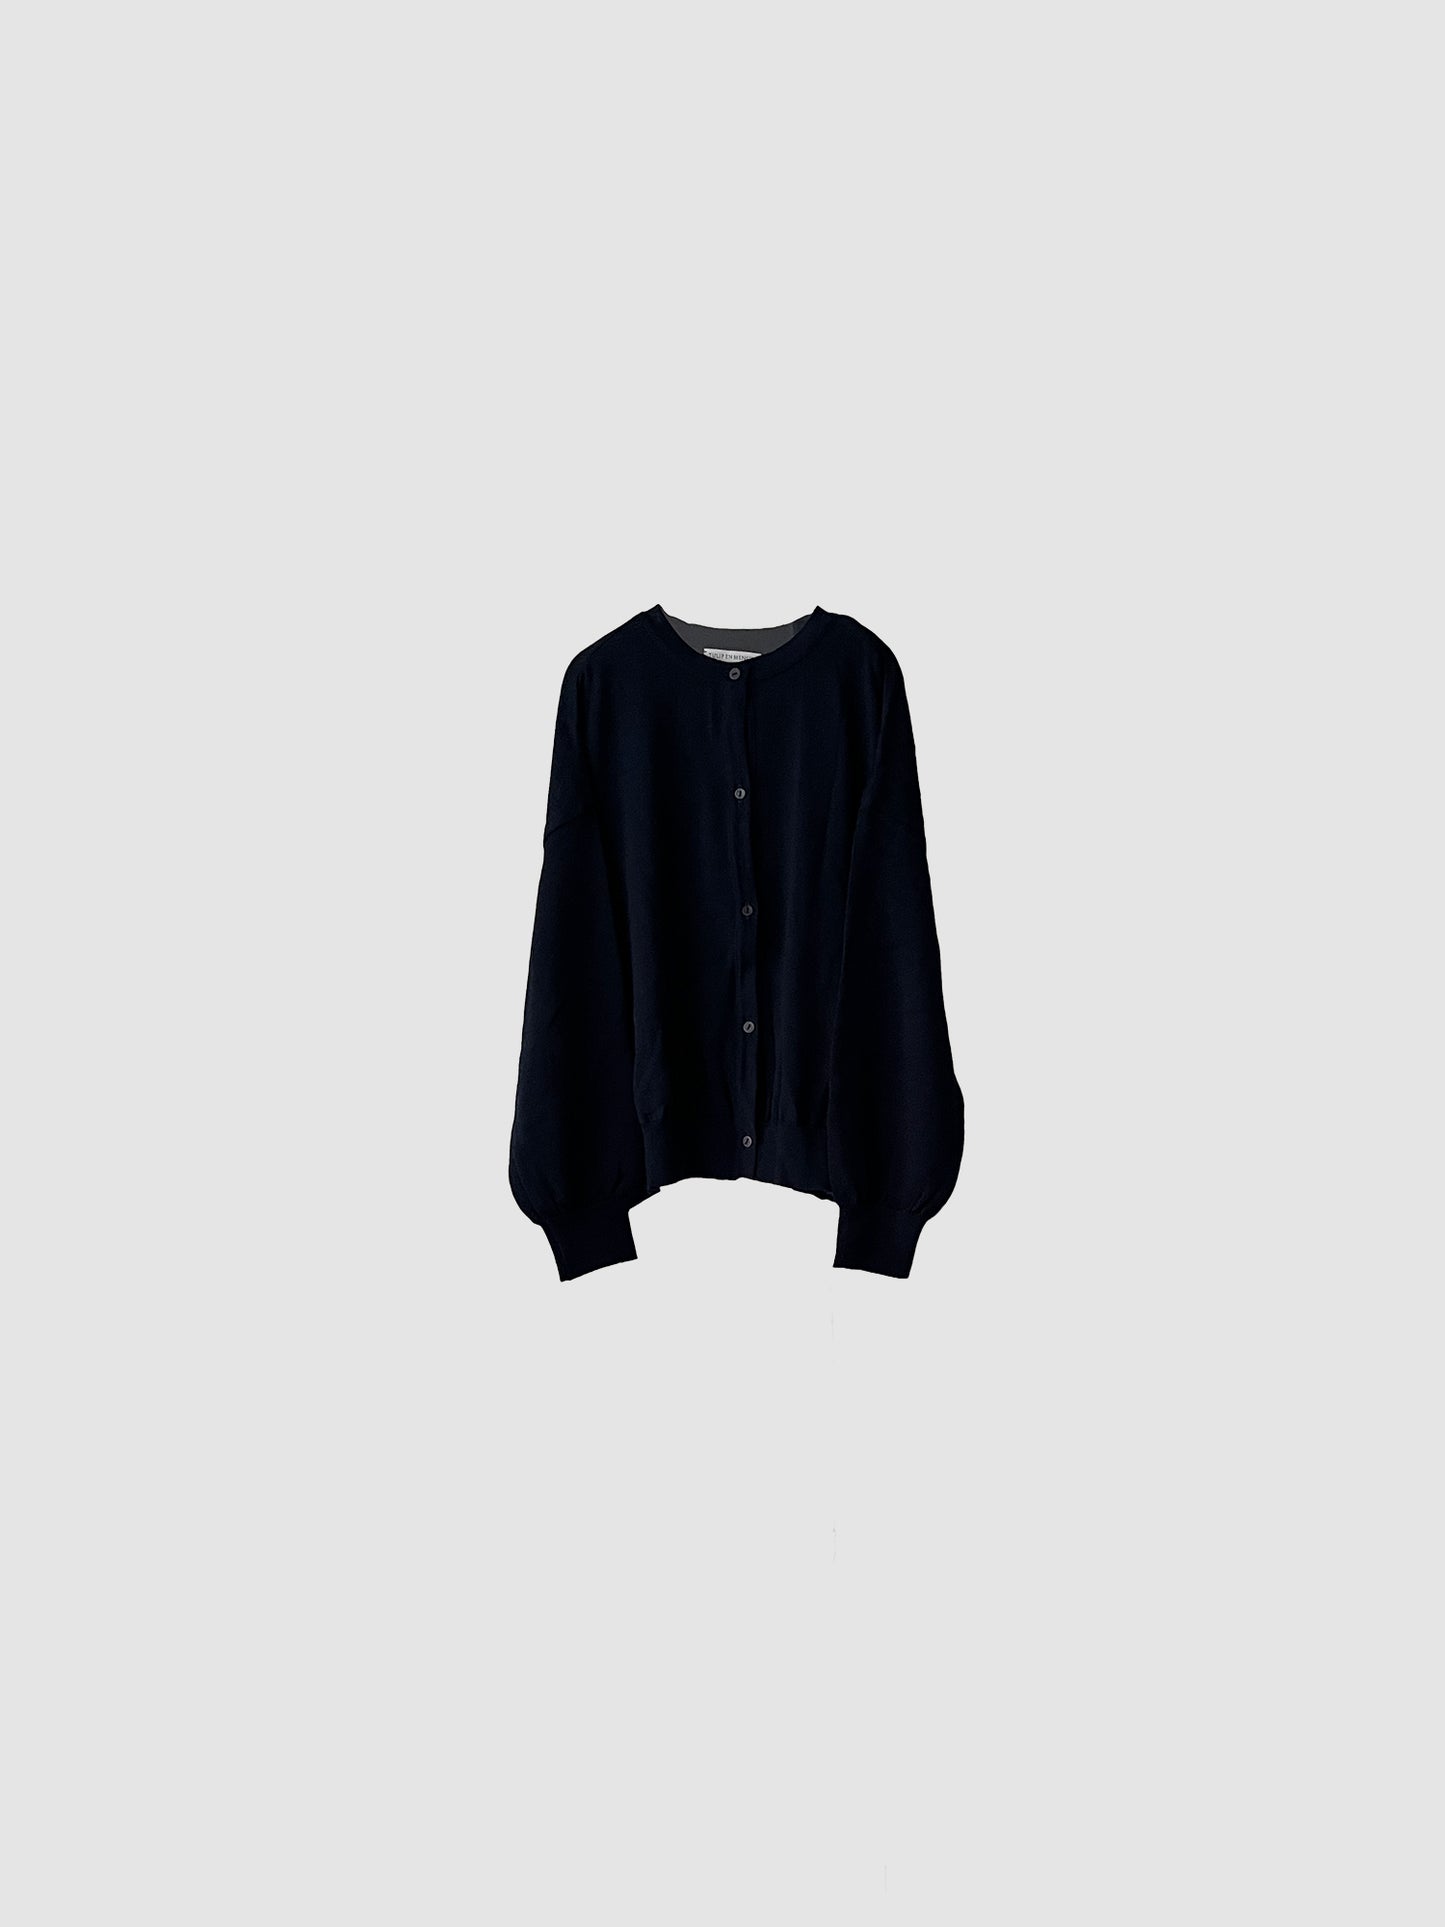 Wide cardigan / S size